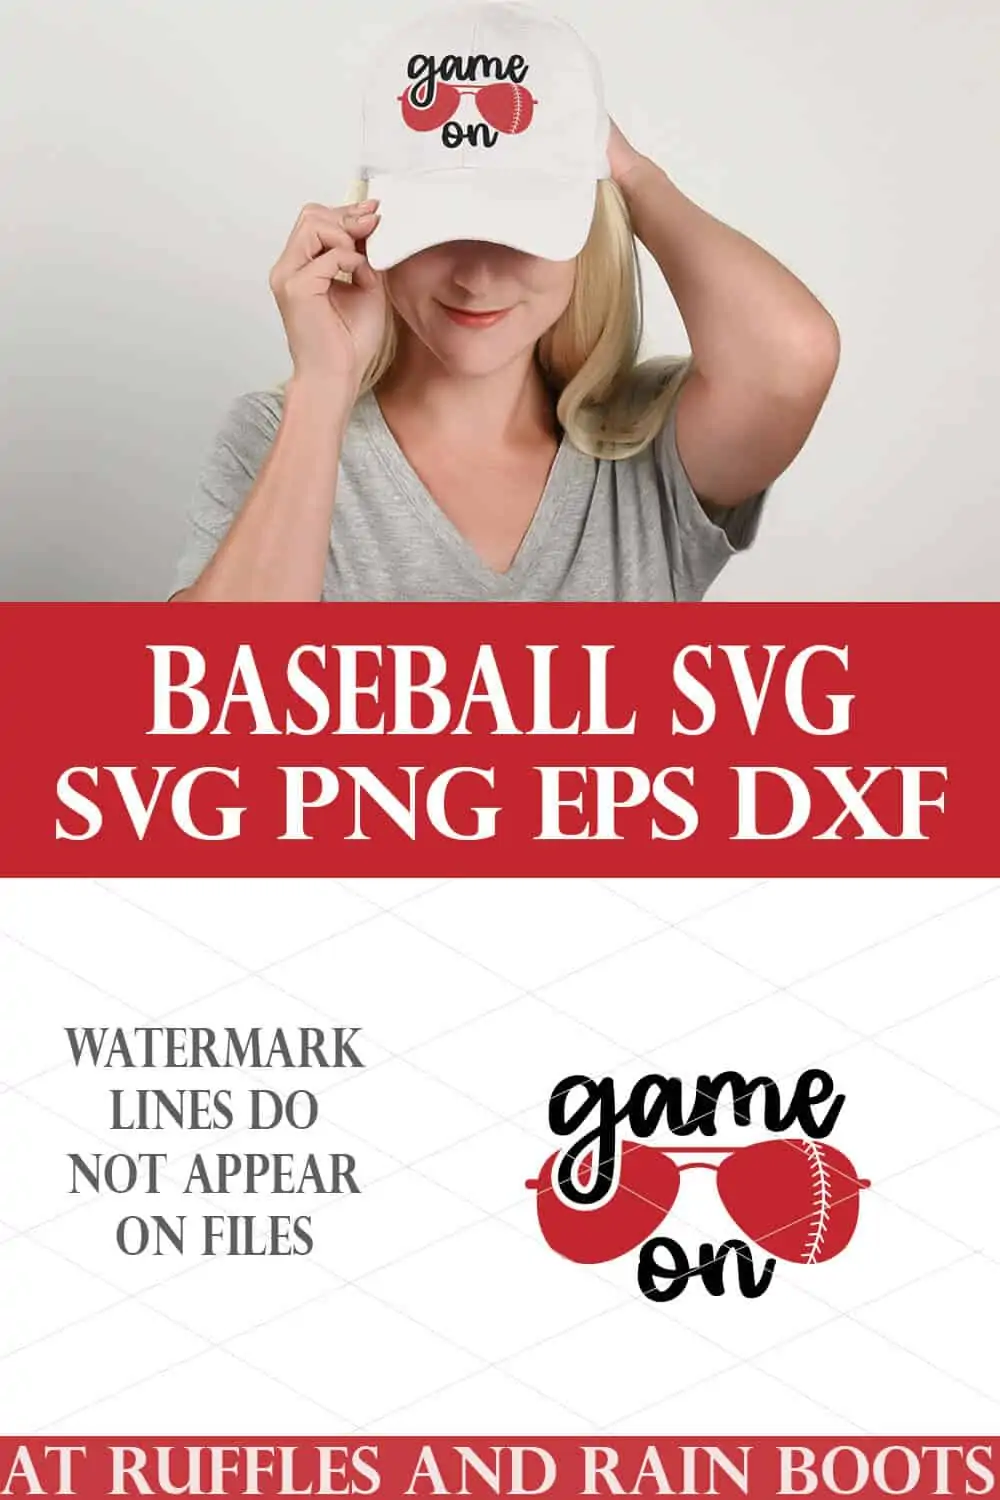 baseball game on svg in red and script lettering on white womans hat